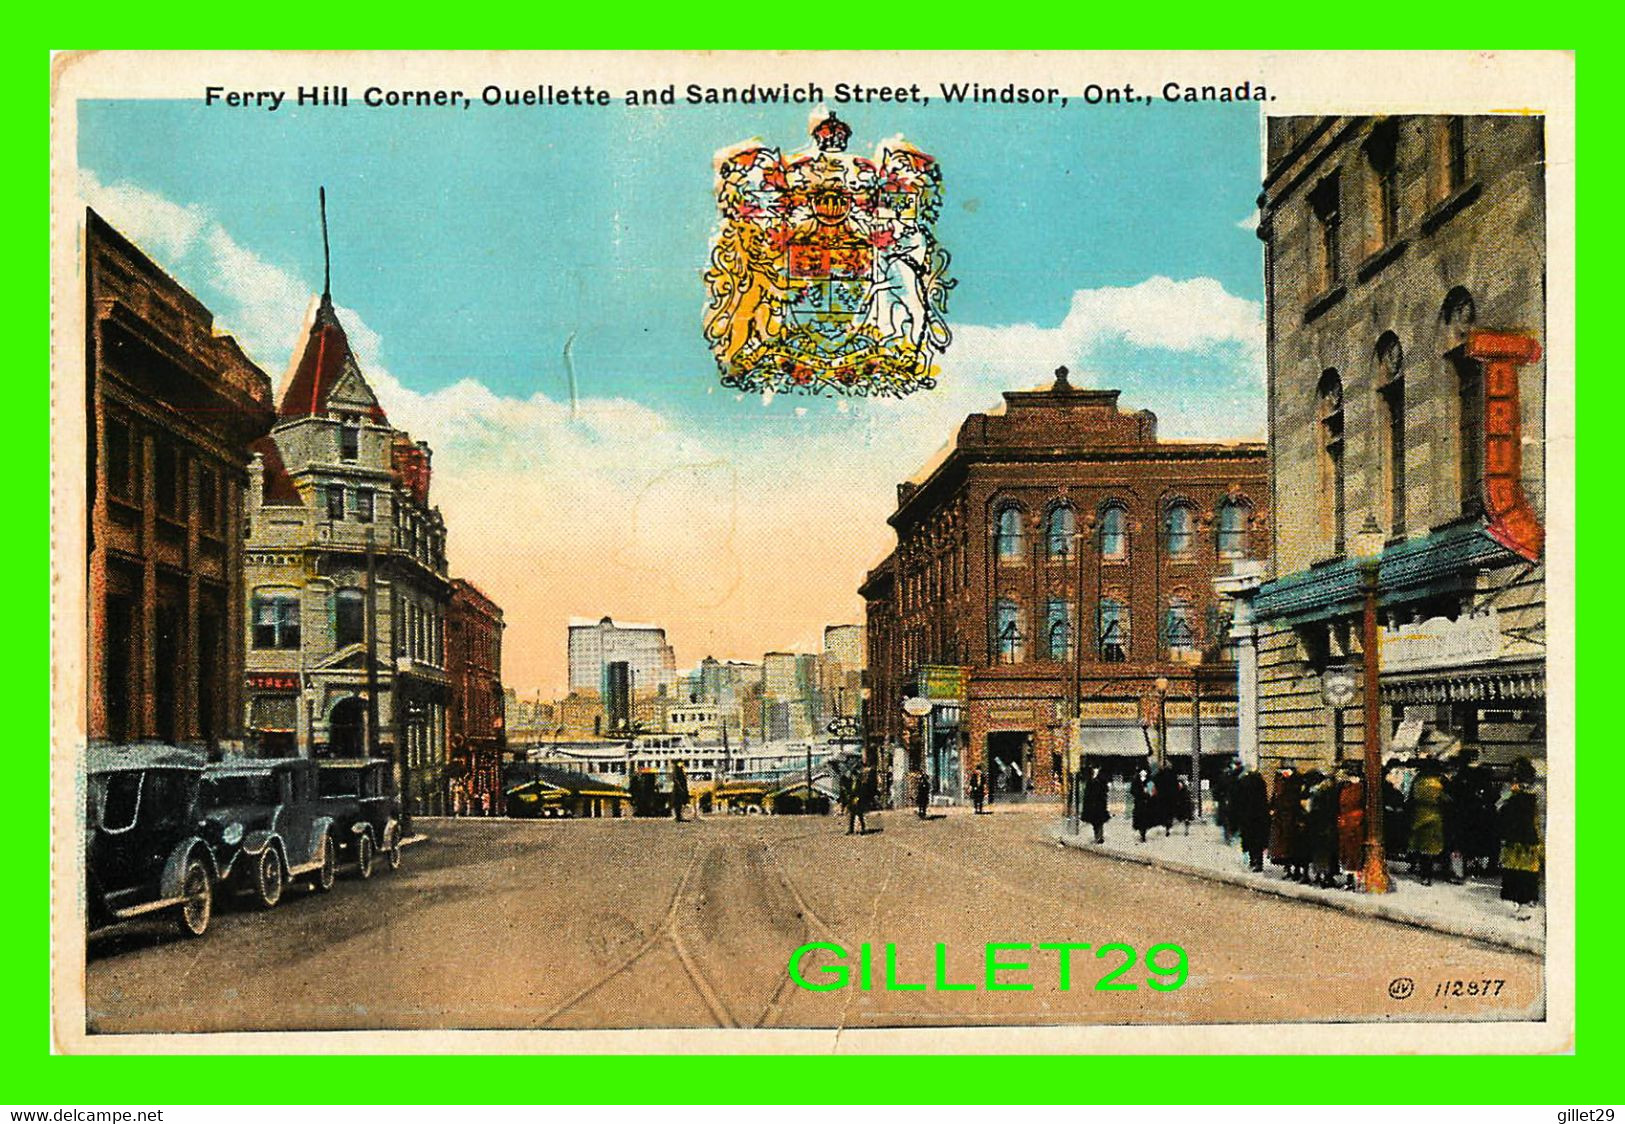 WINDSOR, ONTARIO - FERRY HILL CORNER, OUELLETTE AND SANDWICH STREET - ANIMATED OLD CARS & PEOPLES - VALENTINE & SONS - - Windsor